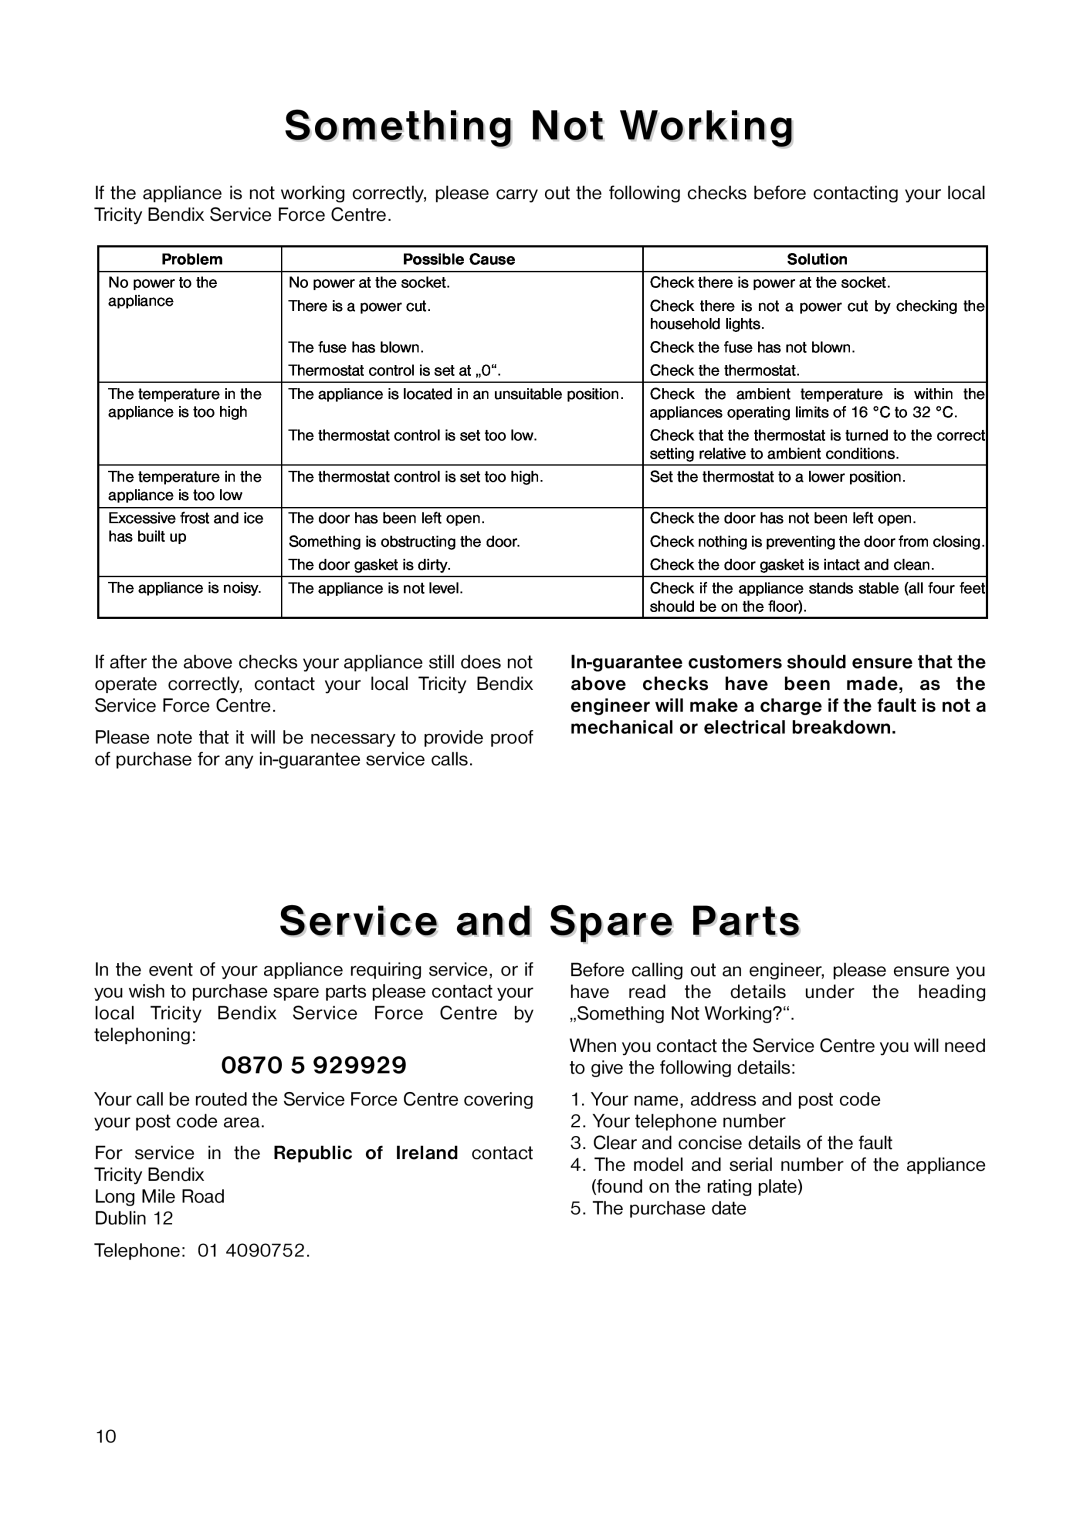 Tricity Bendix TB 56 R installation instructions Something Not Working, Service and Spare Parts, 0870 